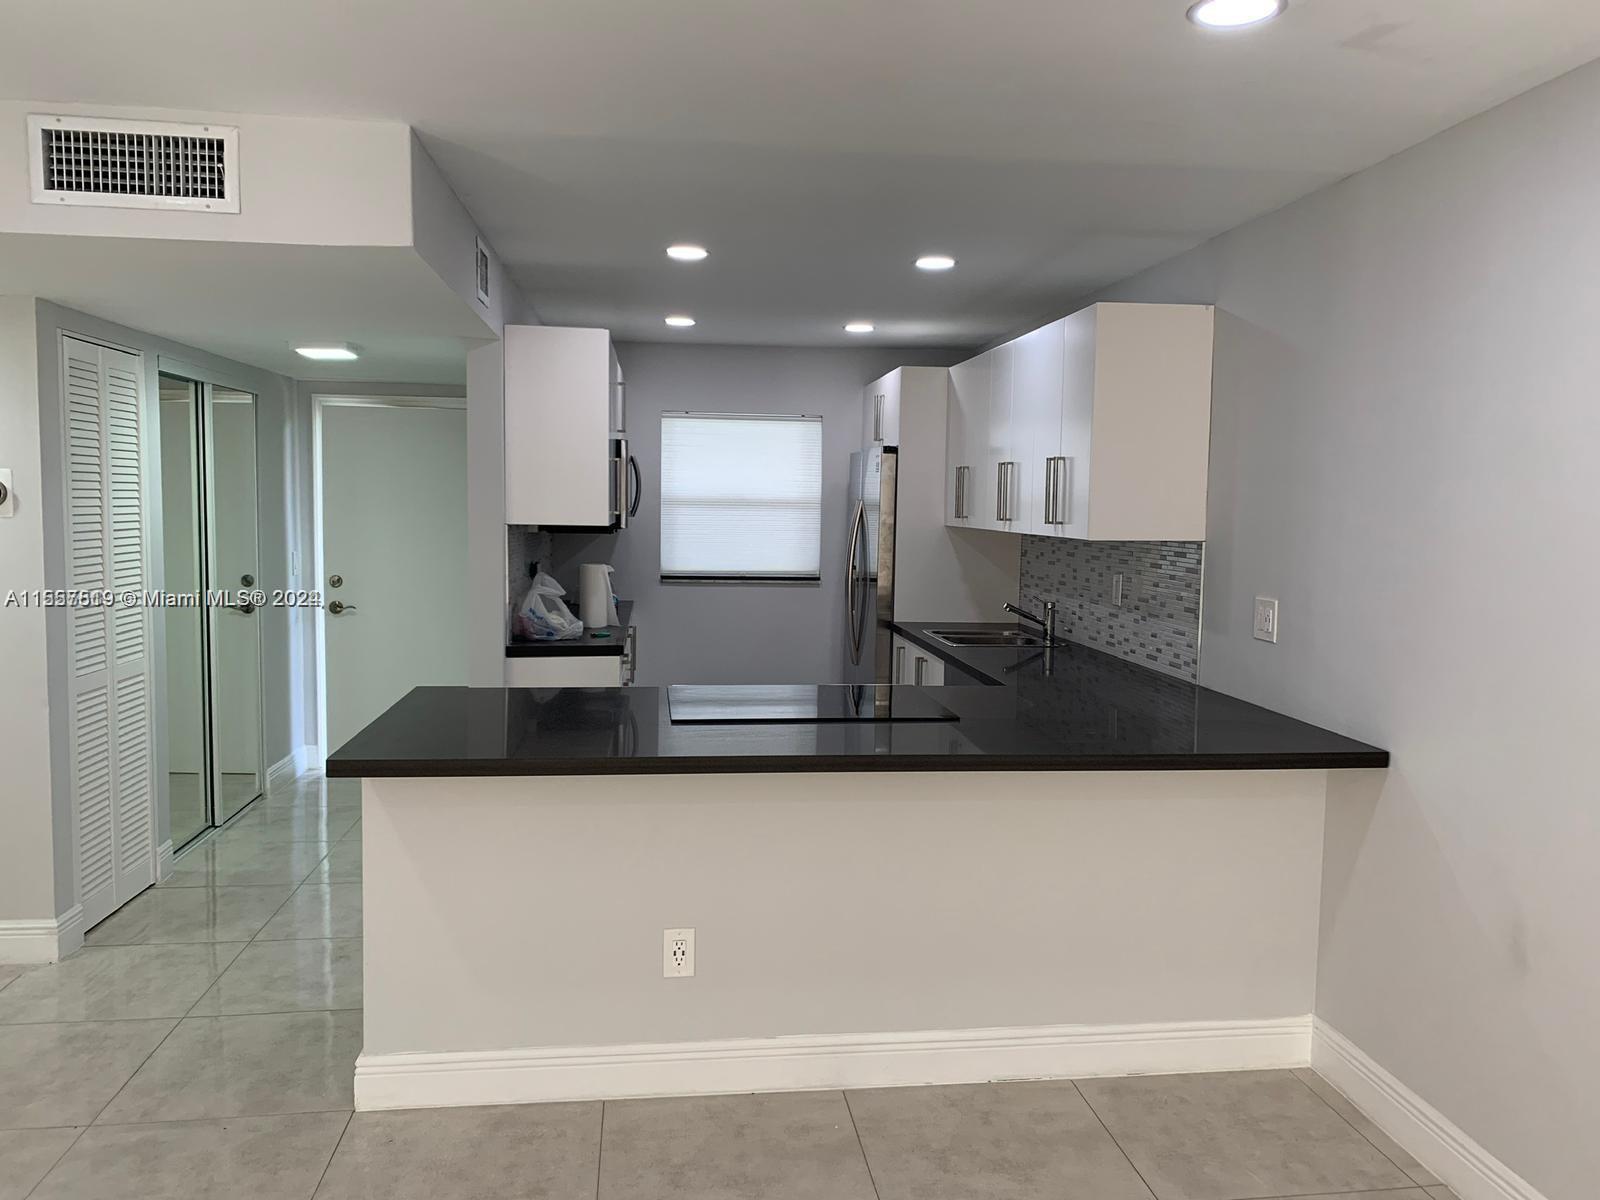 a large kitchen with kitchen island a sink stainless steel appliances and cabinets